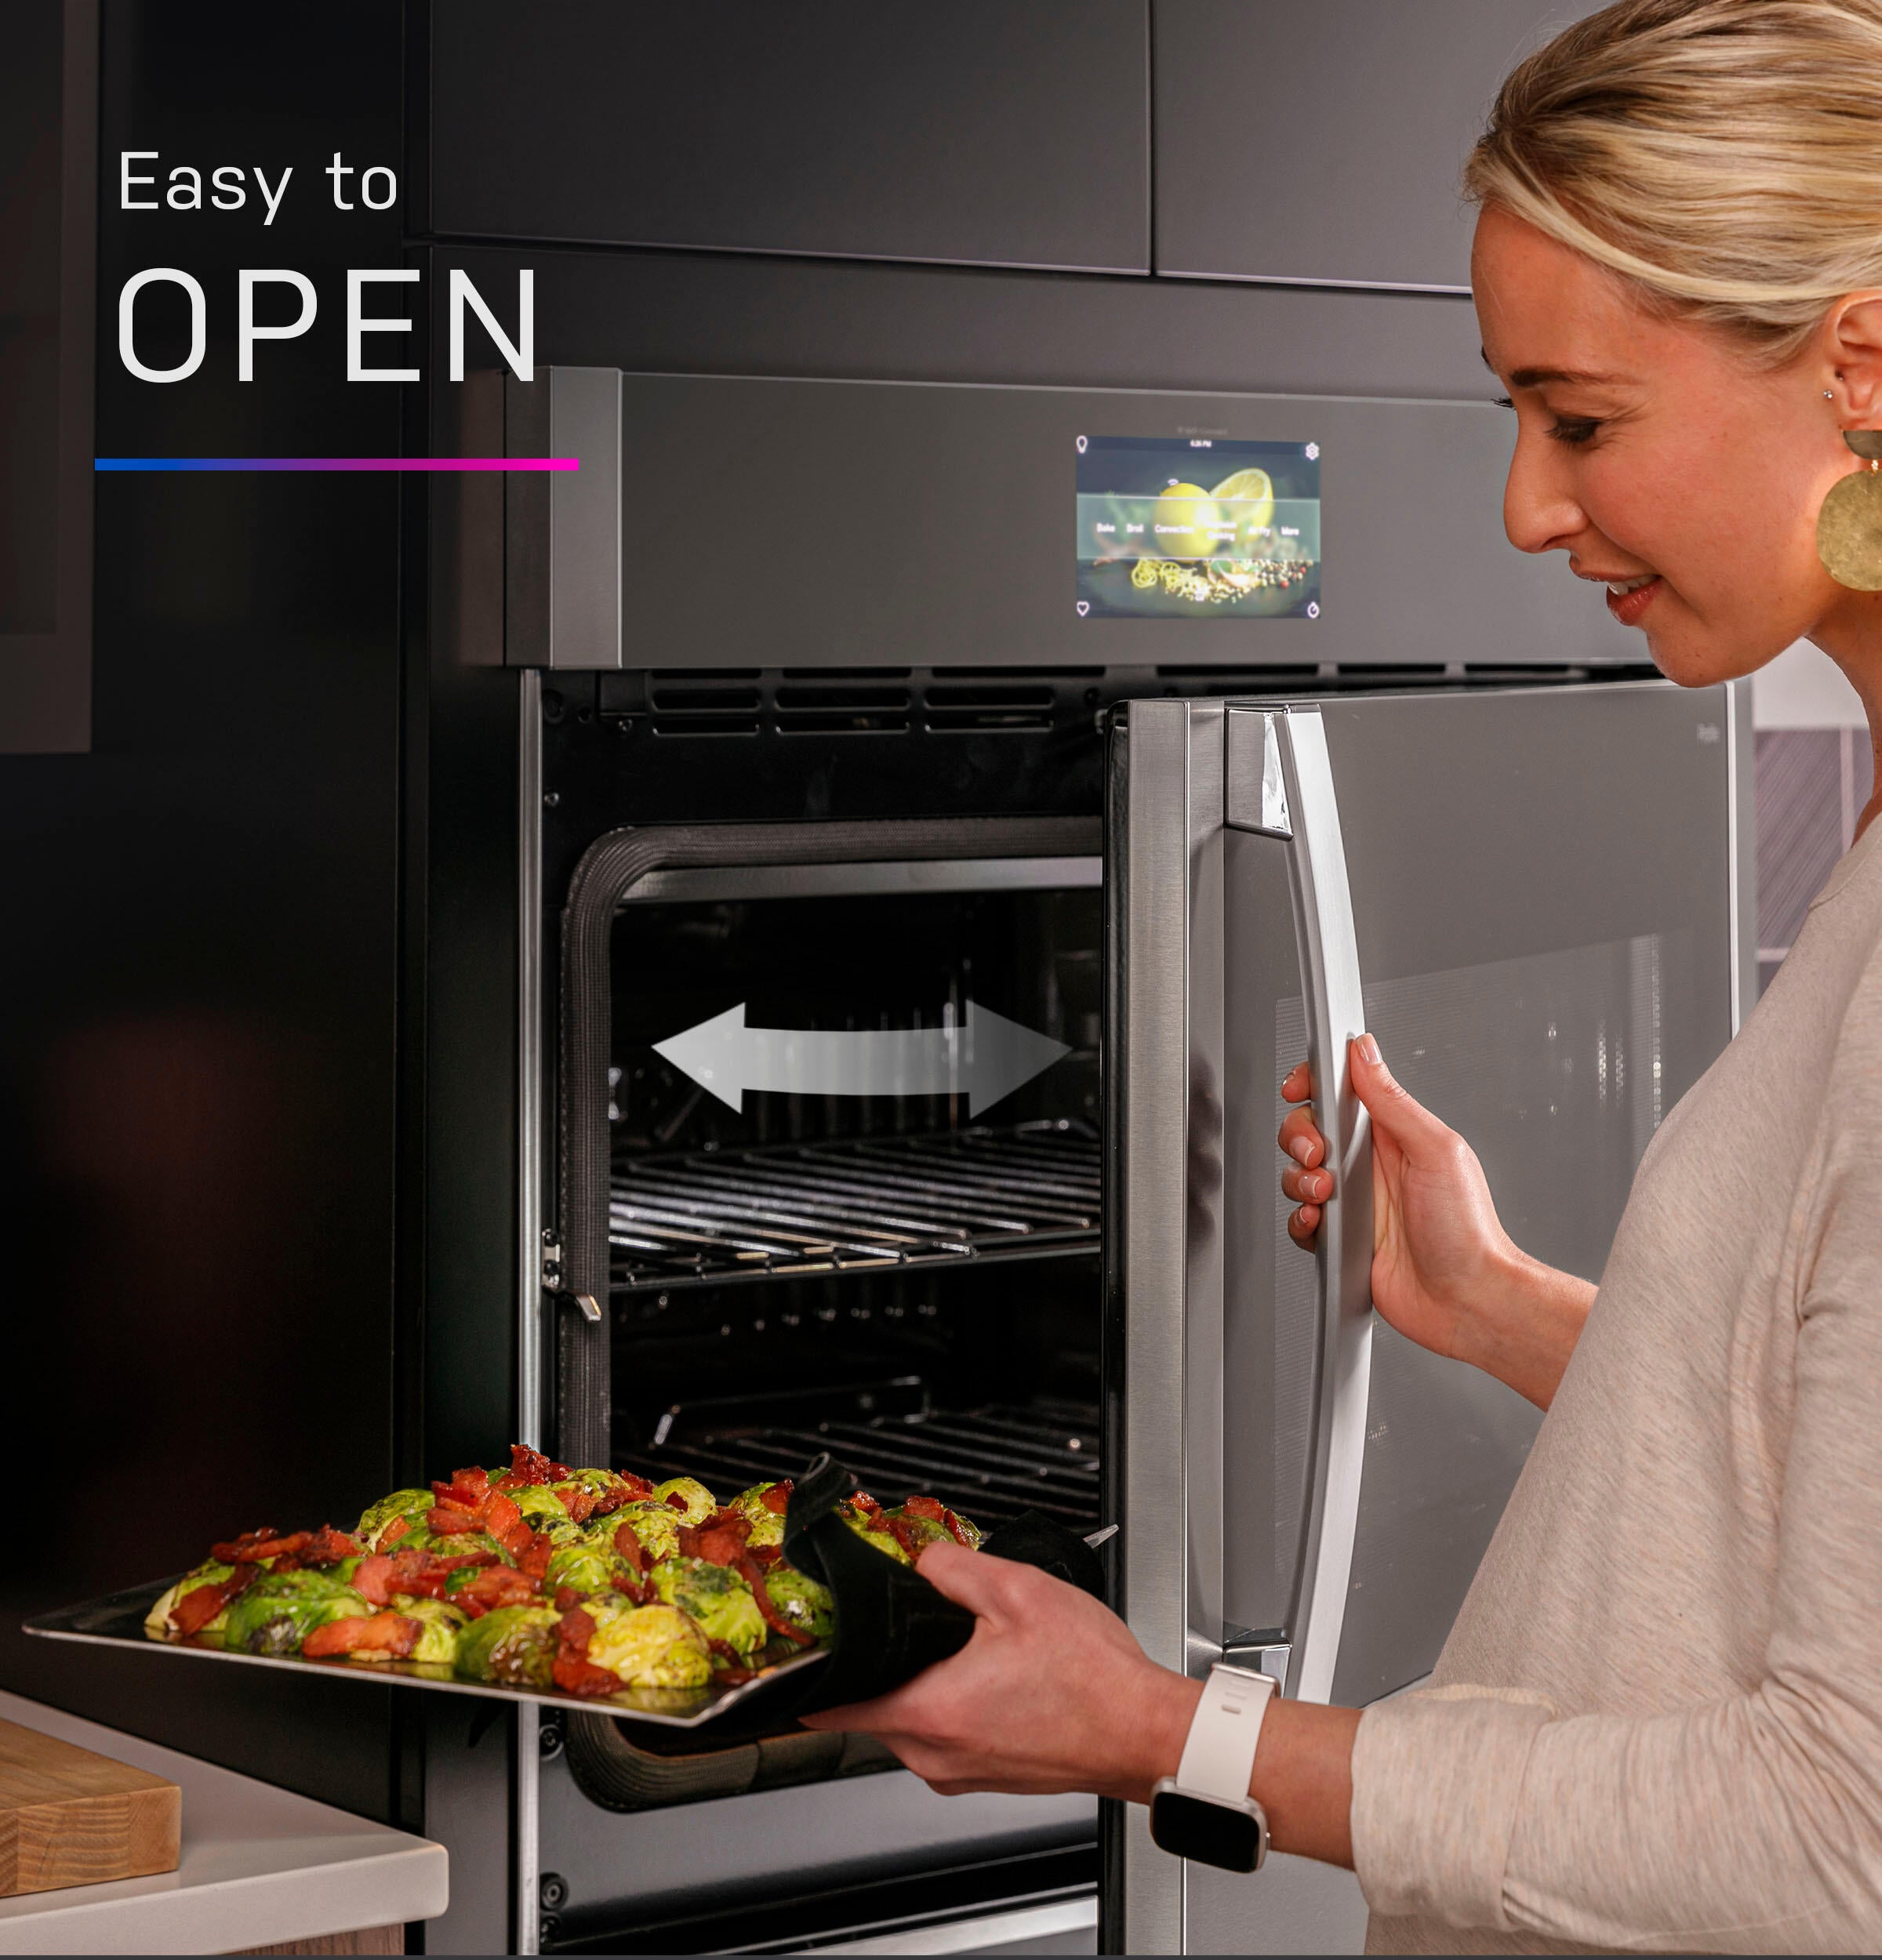 GE Appliances Launches Popular Air Fry Technology in New Wall